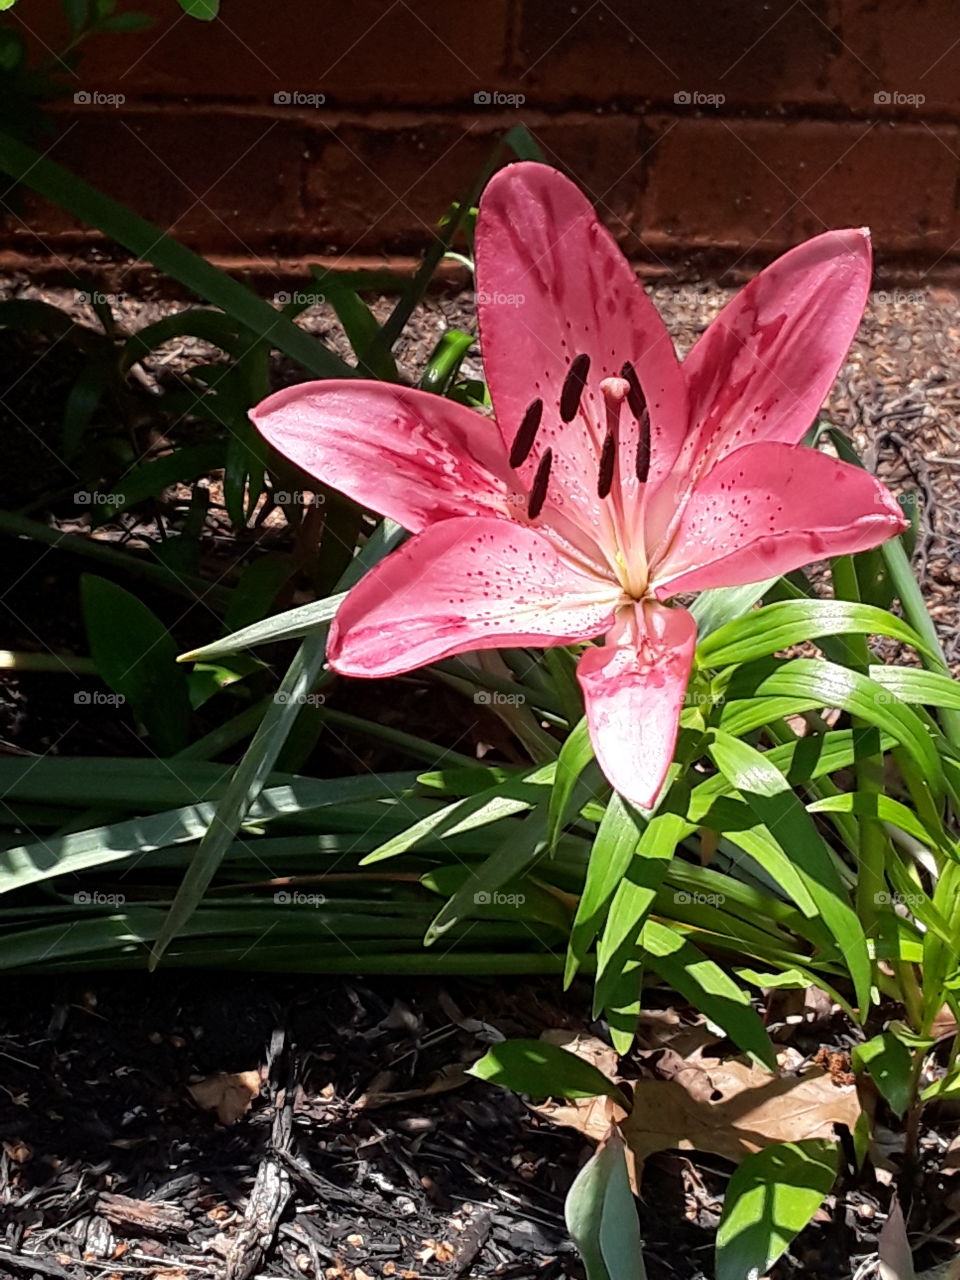 Beautiful ombre styled pink Lily flower, which would also be great for stock photo companies or someone who loves nature.